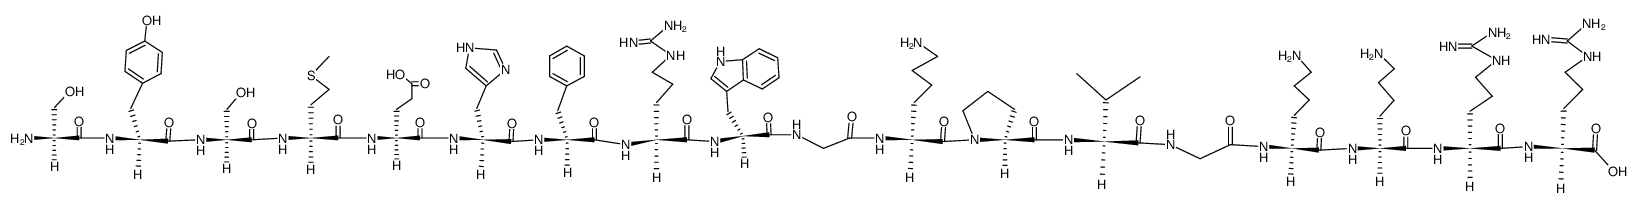 ACTH alpha (1-18) structure